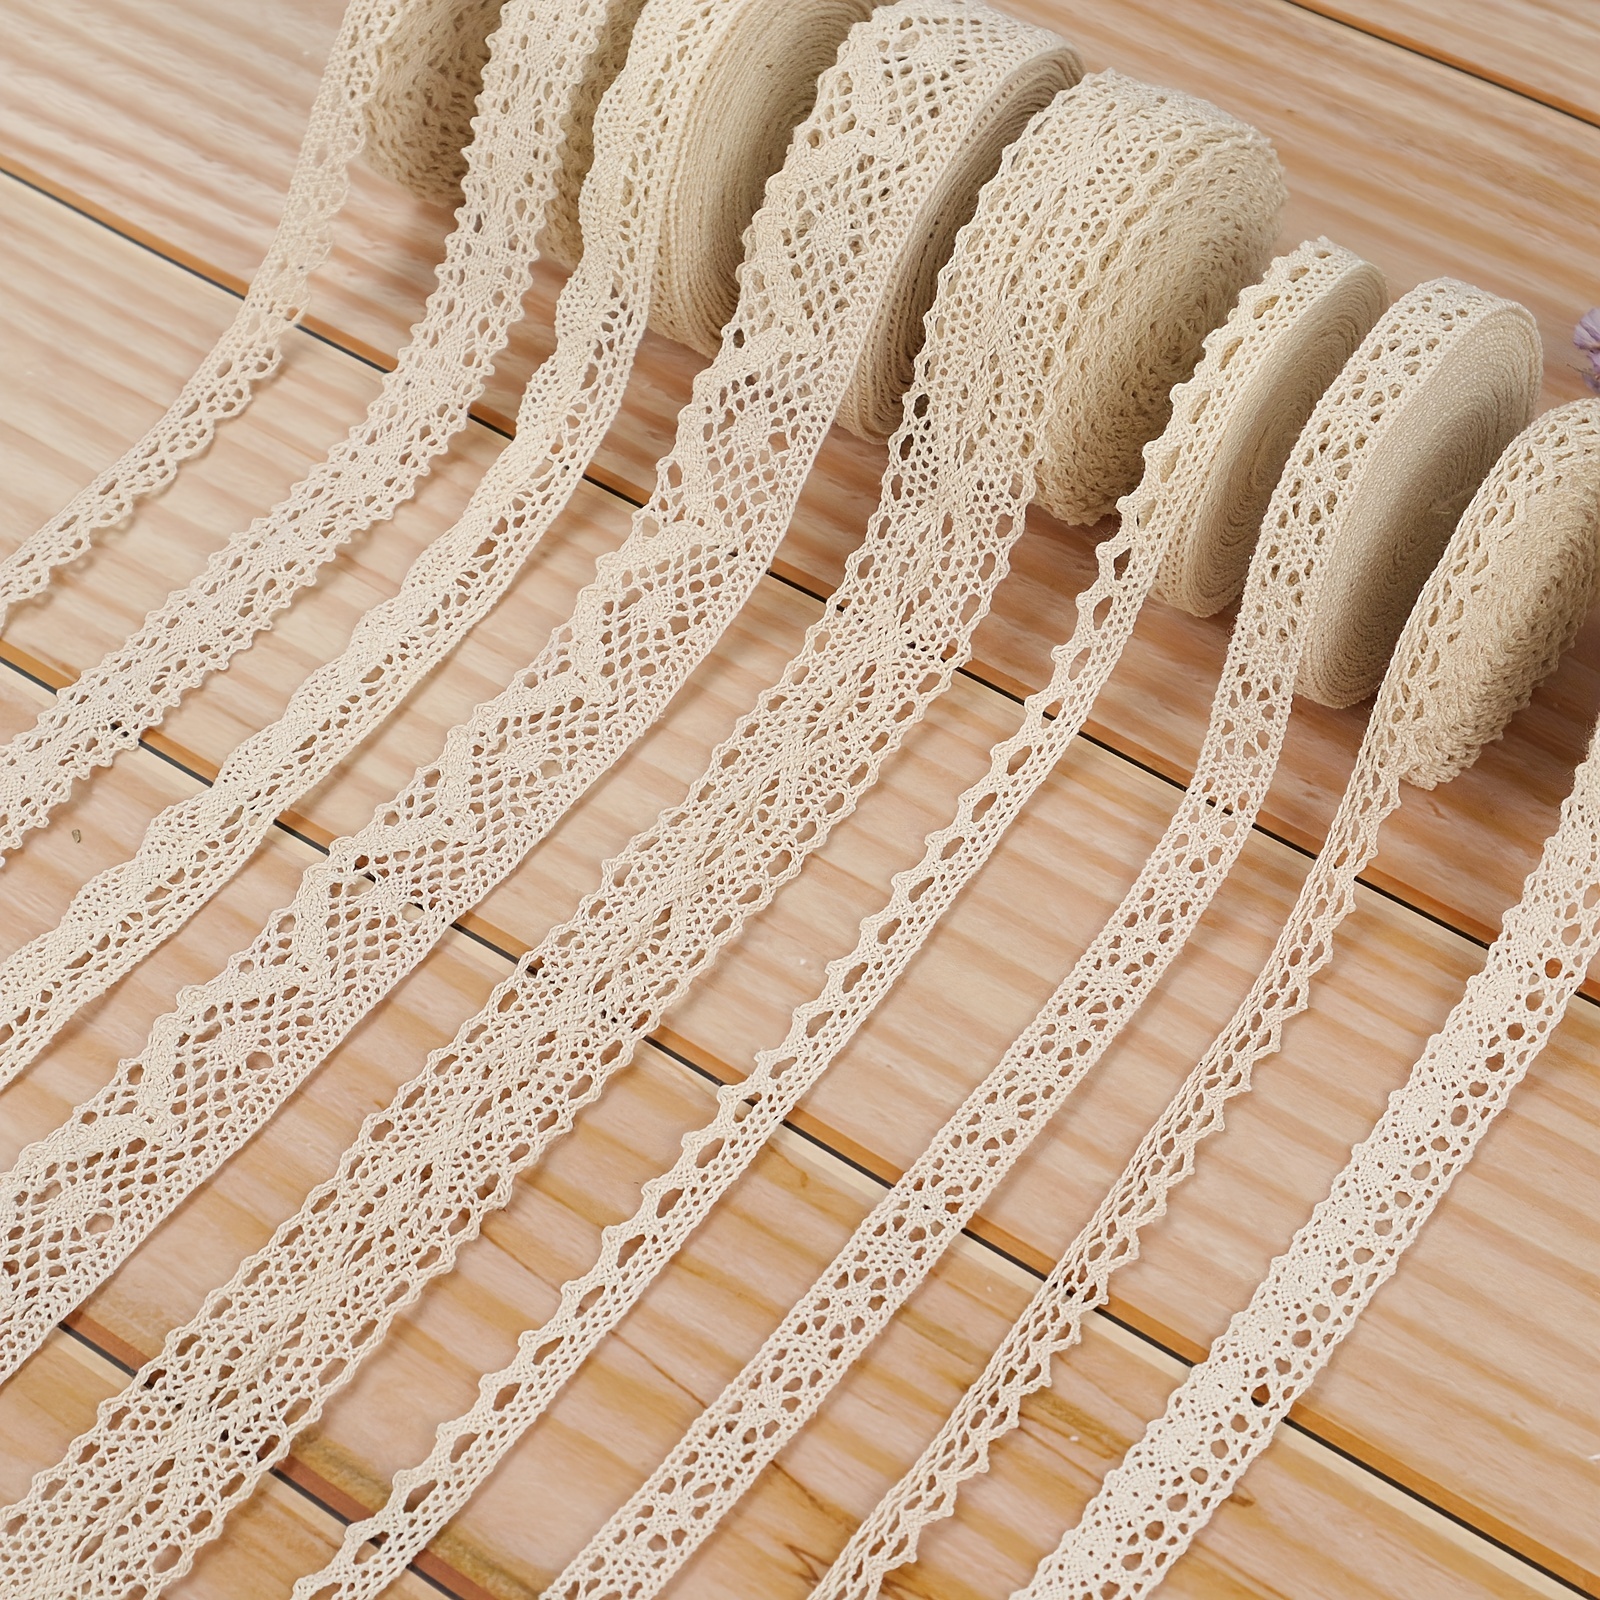 2M Ribbon Lace Ribbon Cotton Lace Trim Vintage White Beige Crochet Lace  Scalloped Edge for Gift Wrapping DIY Sewing Craft Supply